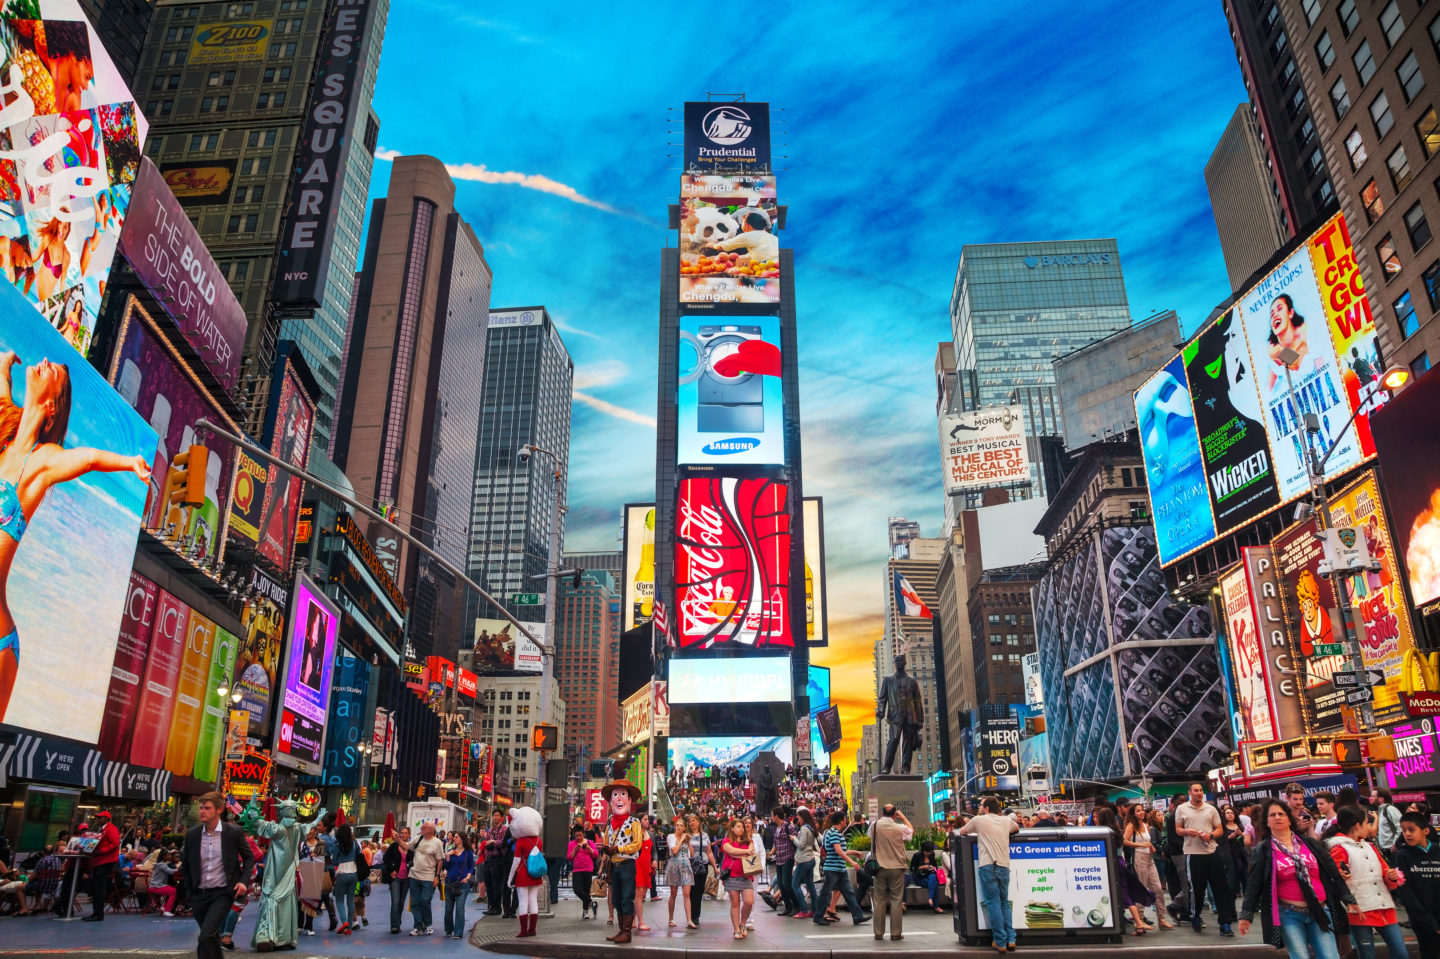 Times Square, The Crossroads of the World, the brightly illuminated hub of the Broadway Theater District